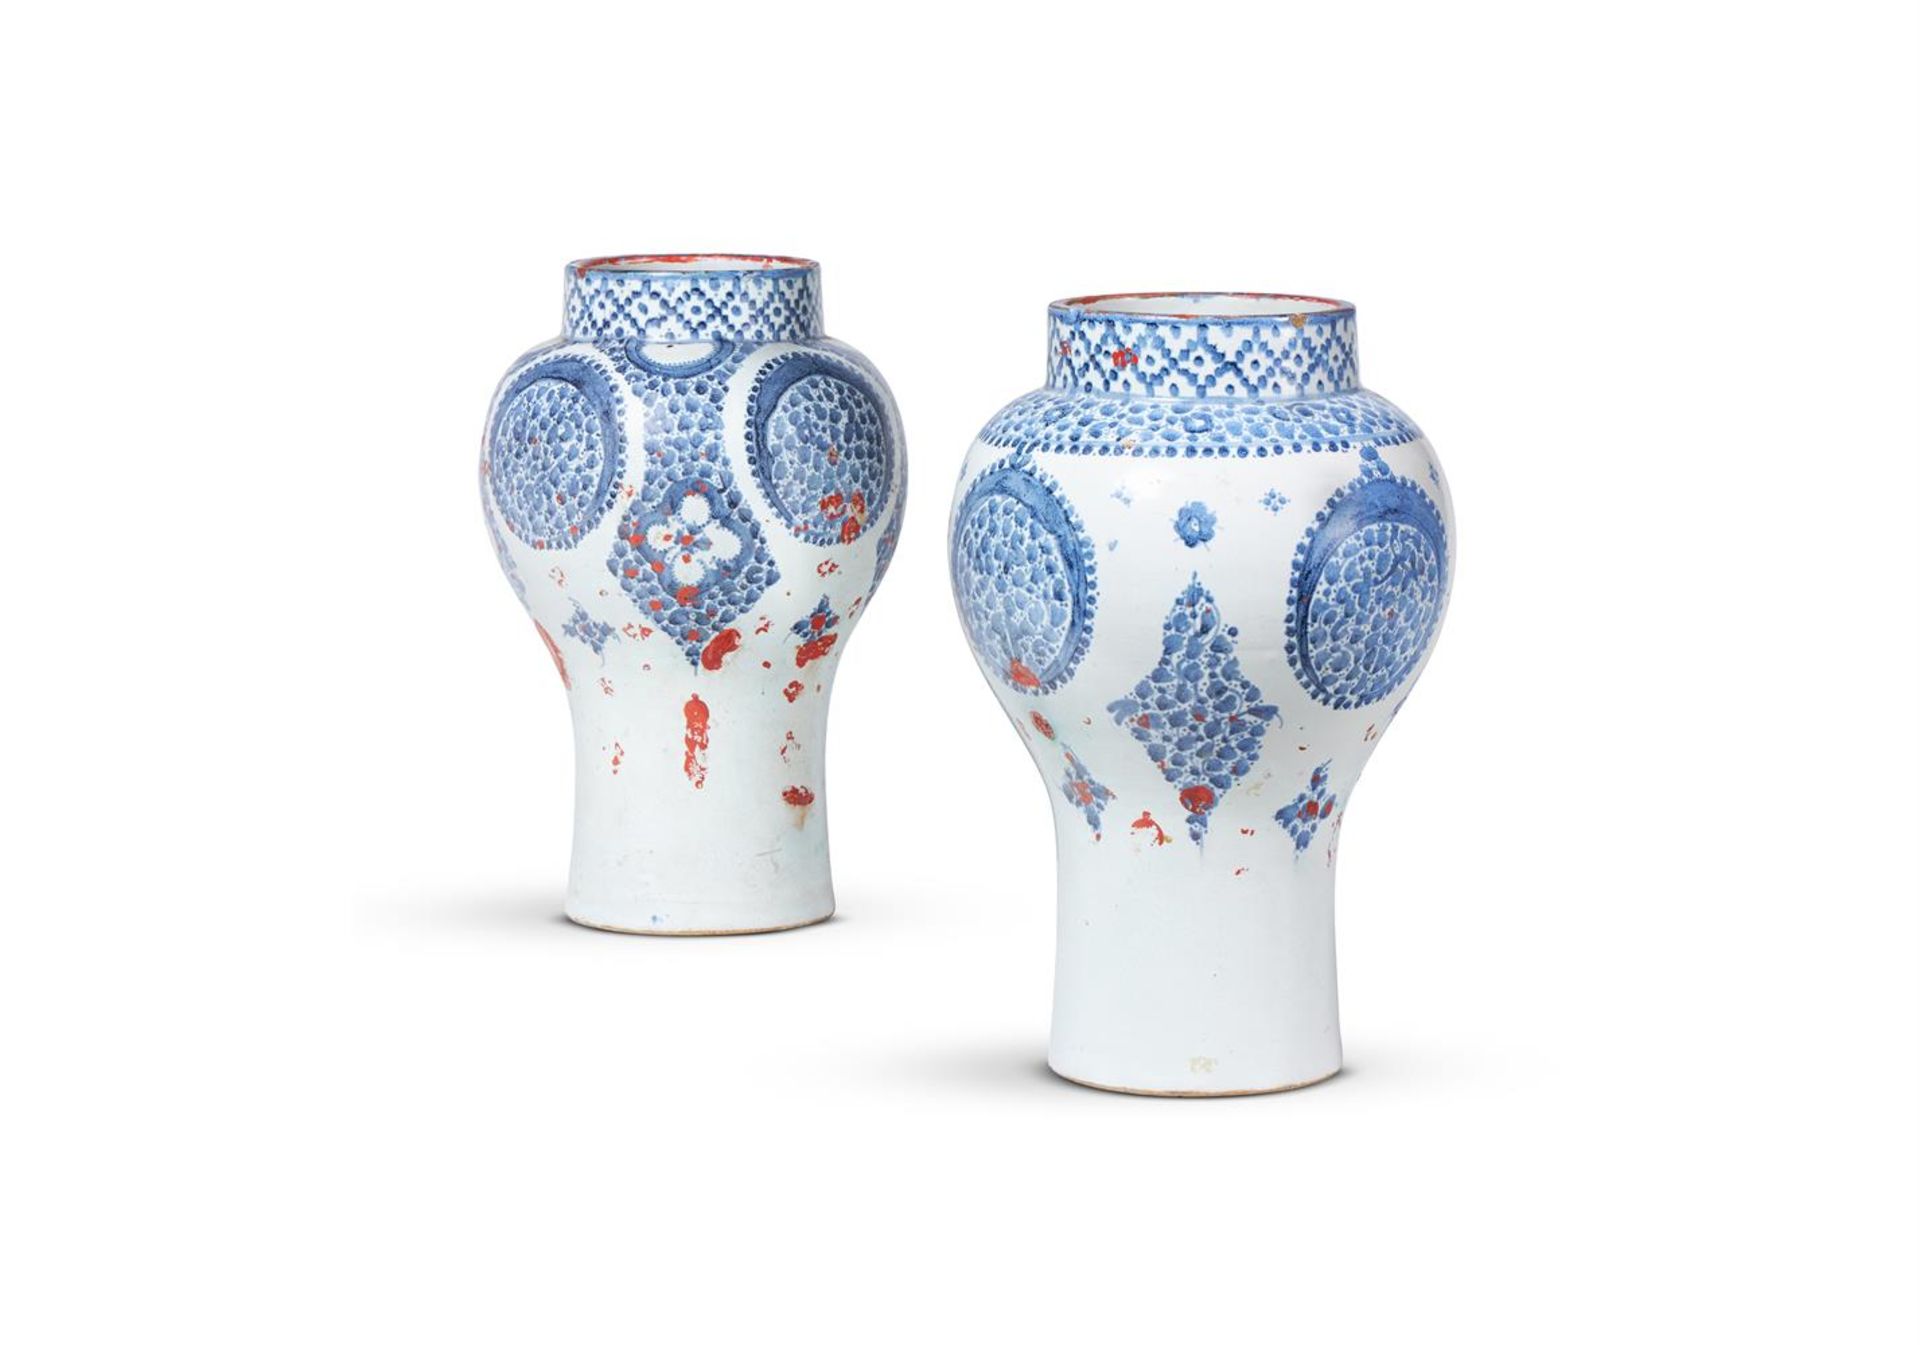 A PAIR OF BLUE AND WHITE VASES, POSSIBLY NORTH AFRICA, 19TH CENTURY